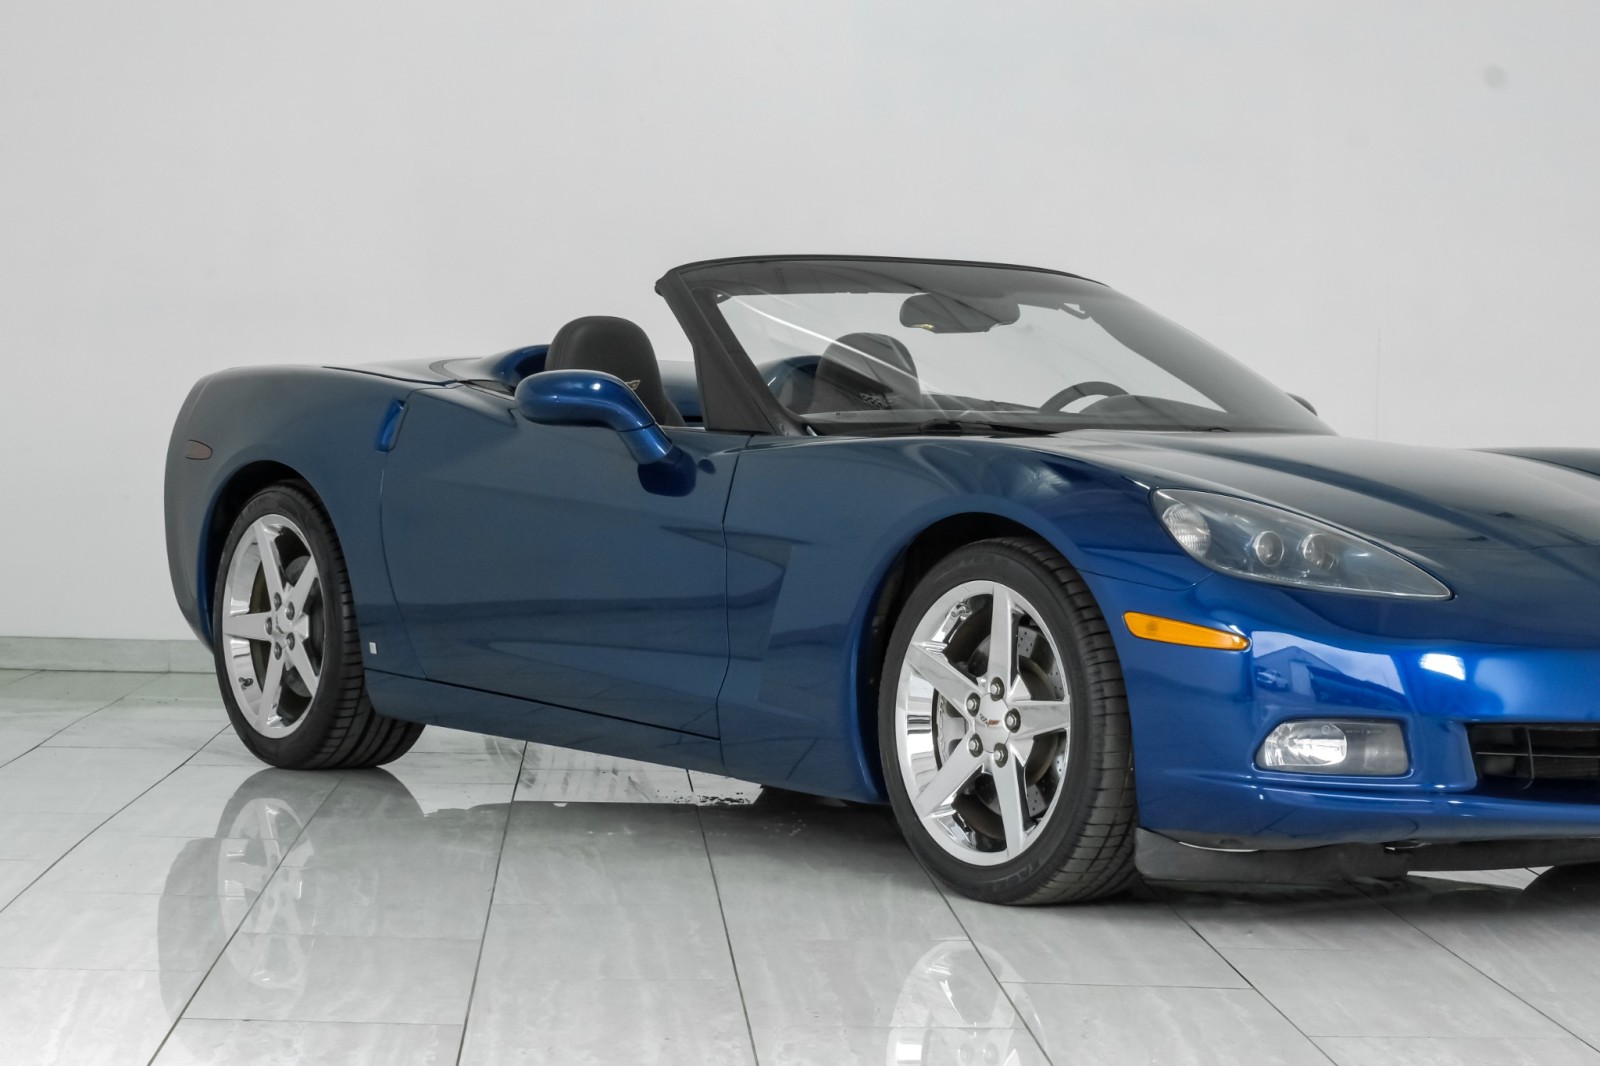 2007 Chevrolet Corvette Convertible AUTOMATIC NAVIGATION HEADUP DISPLAY LEATHER HEATED 4